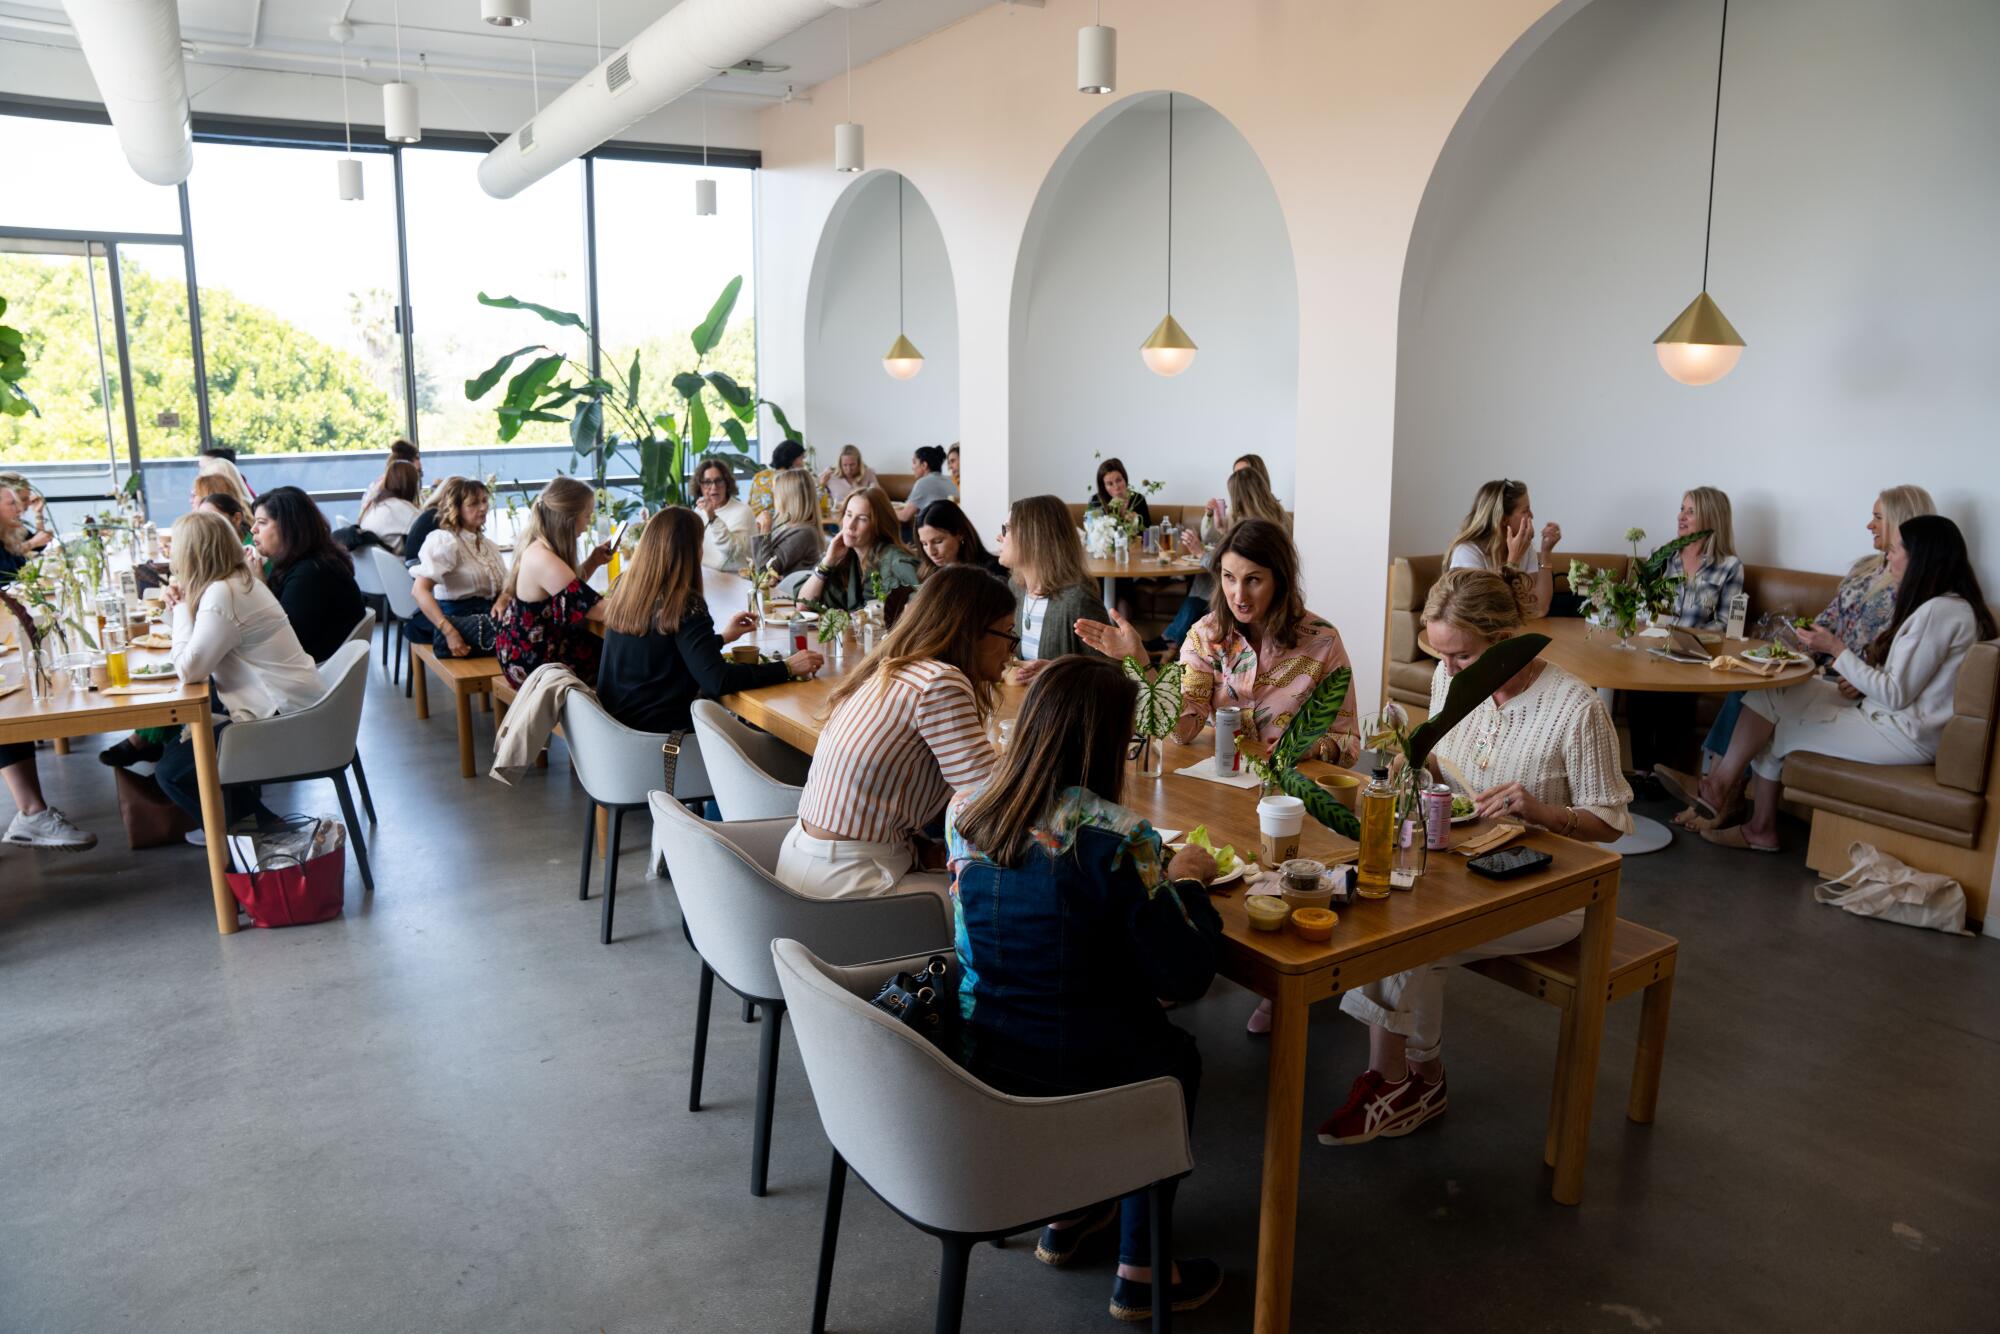 Attendees gather at lunch during the Goop event in Santa Monica.